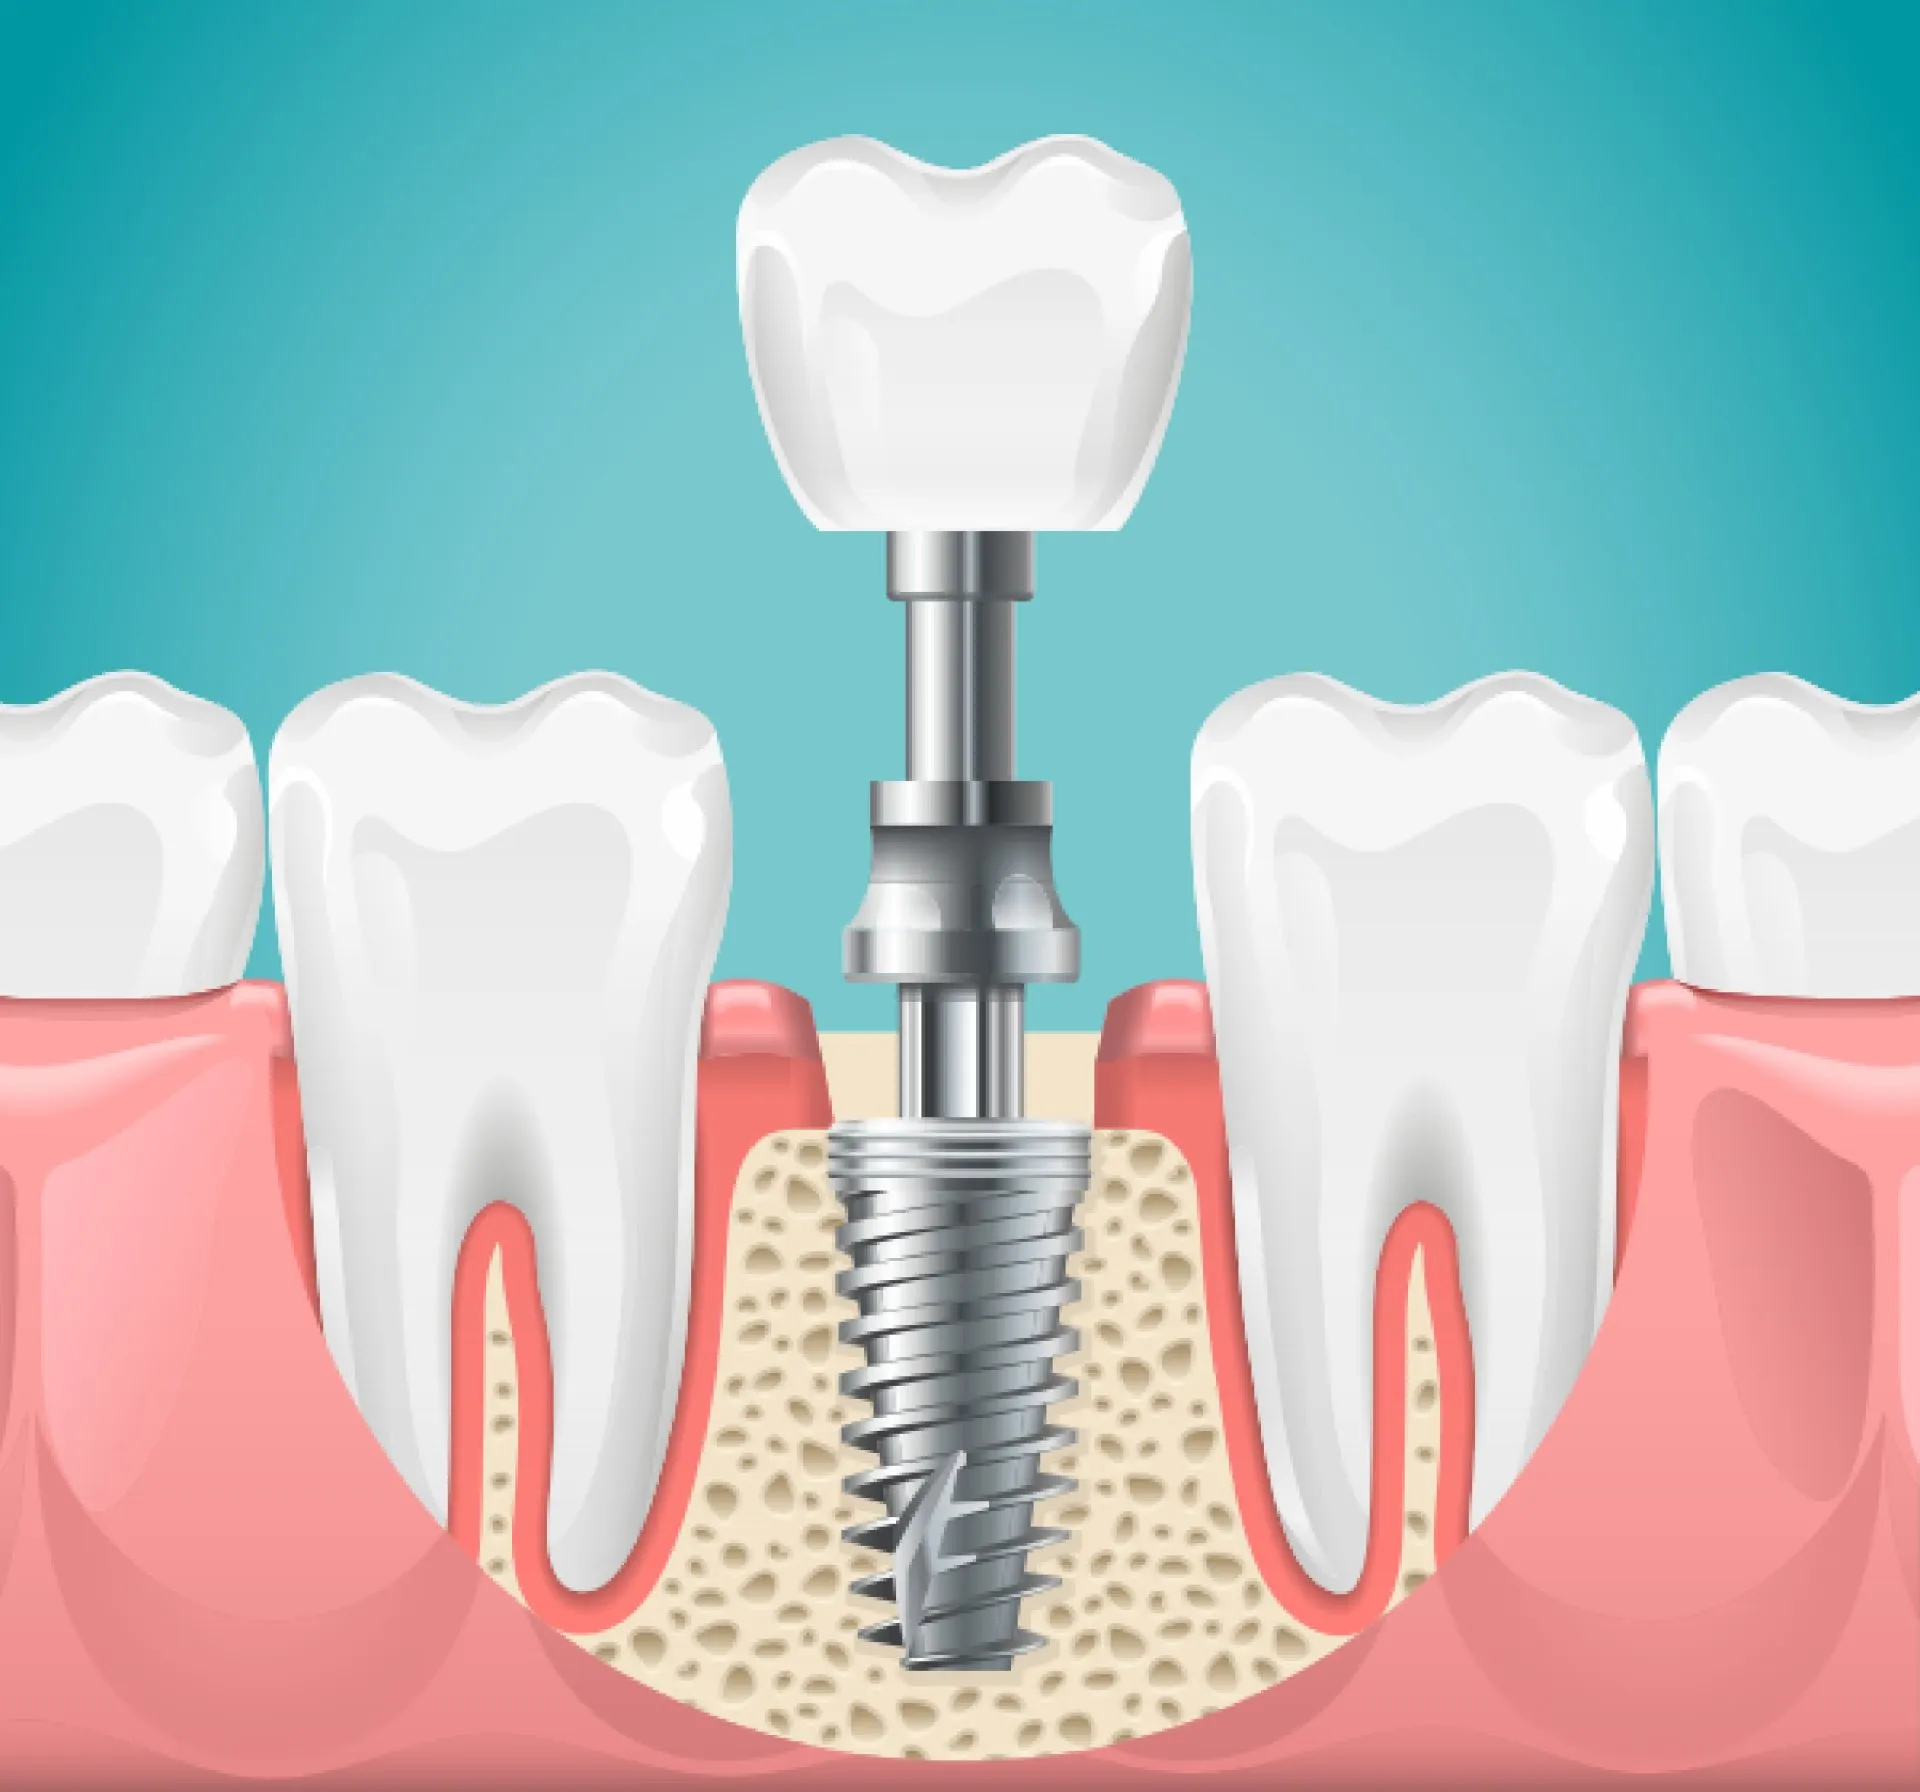 Getting Dental Implants? Ask These Questions to Your Dentist First!